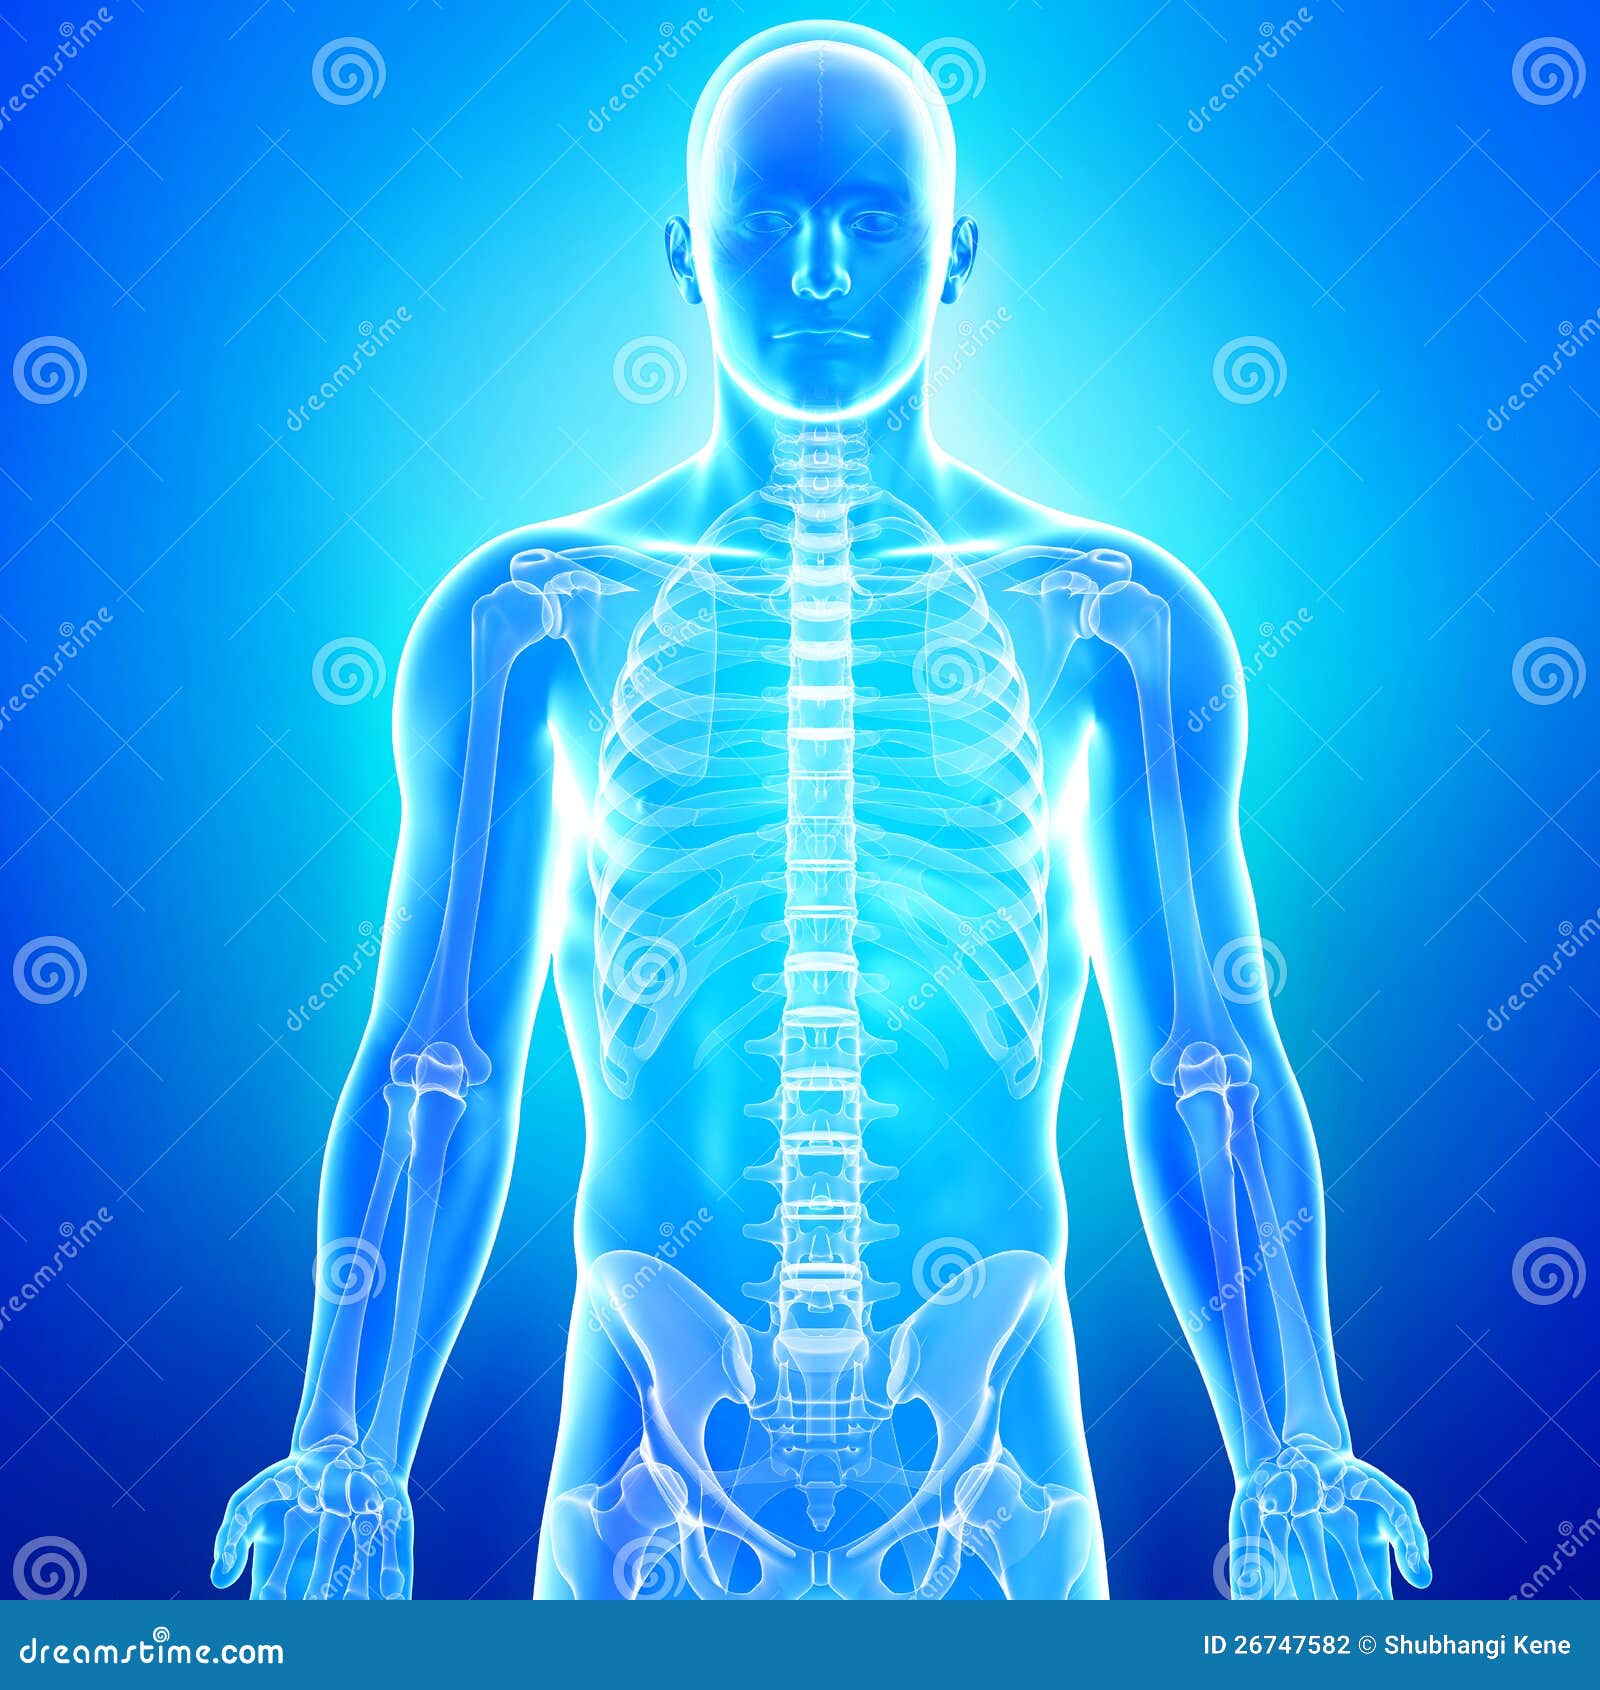 Anatomy Of Human Skeleton In Blue Stock Photography - Image: 26747582